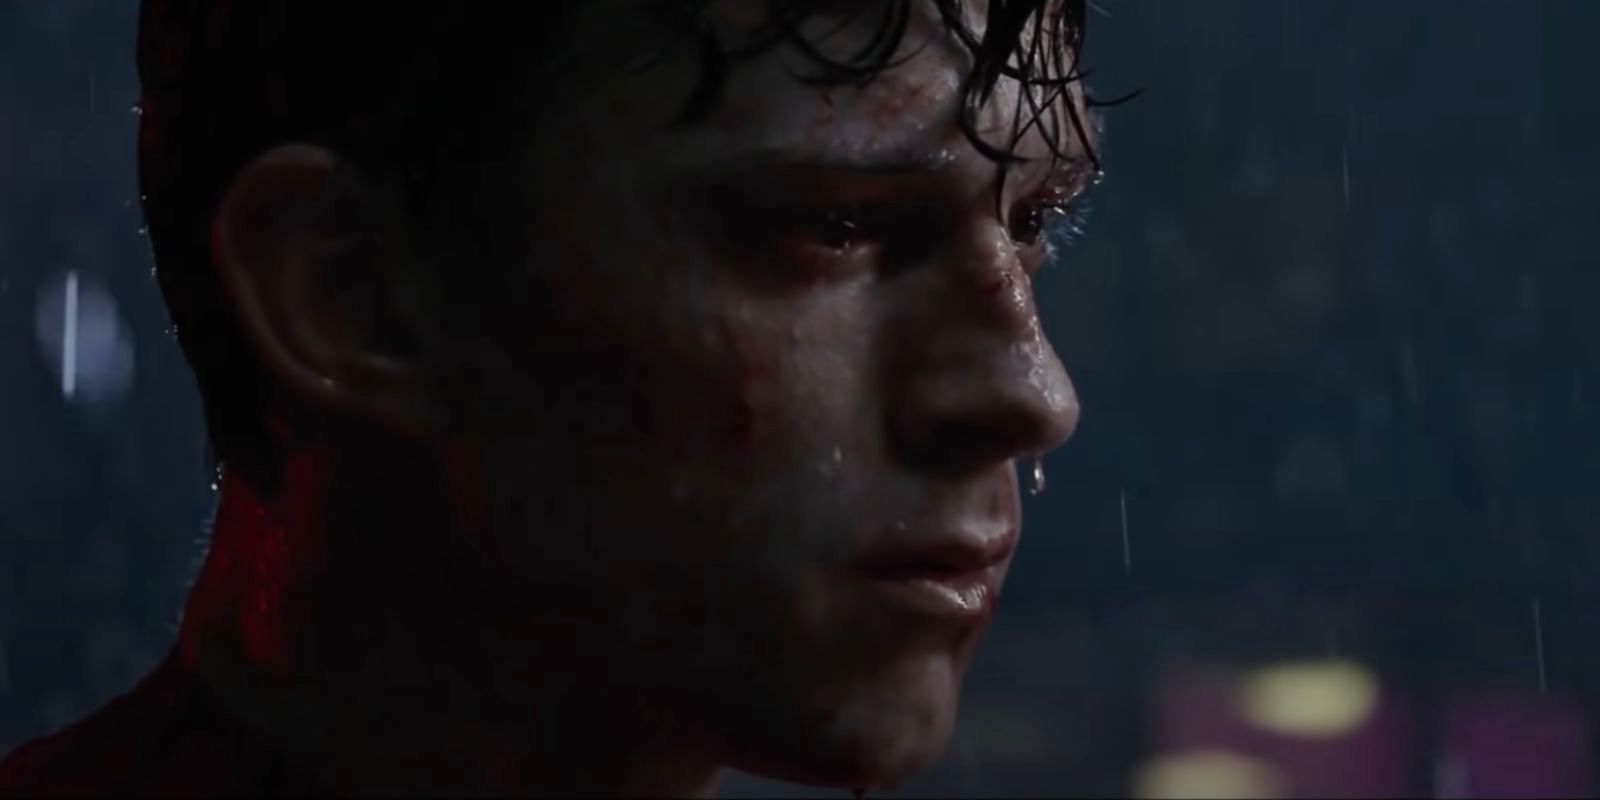 peter parker as spider-man in the no way home trailer